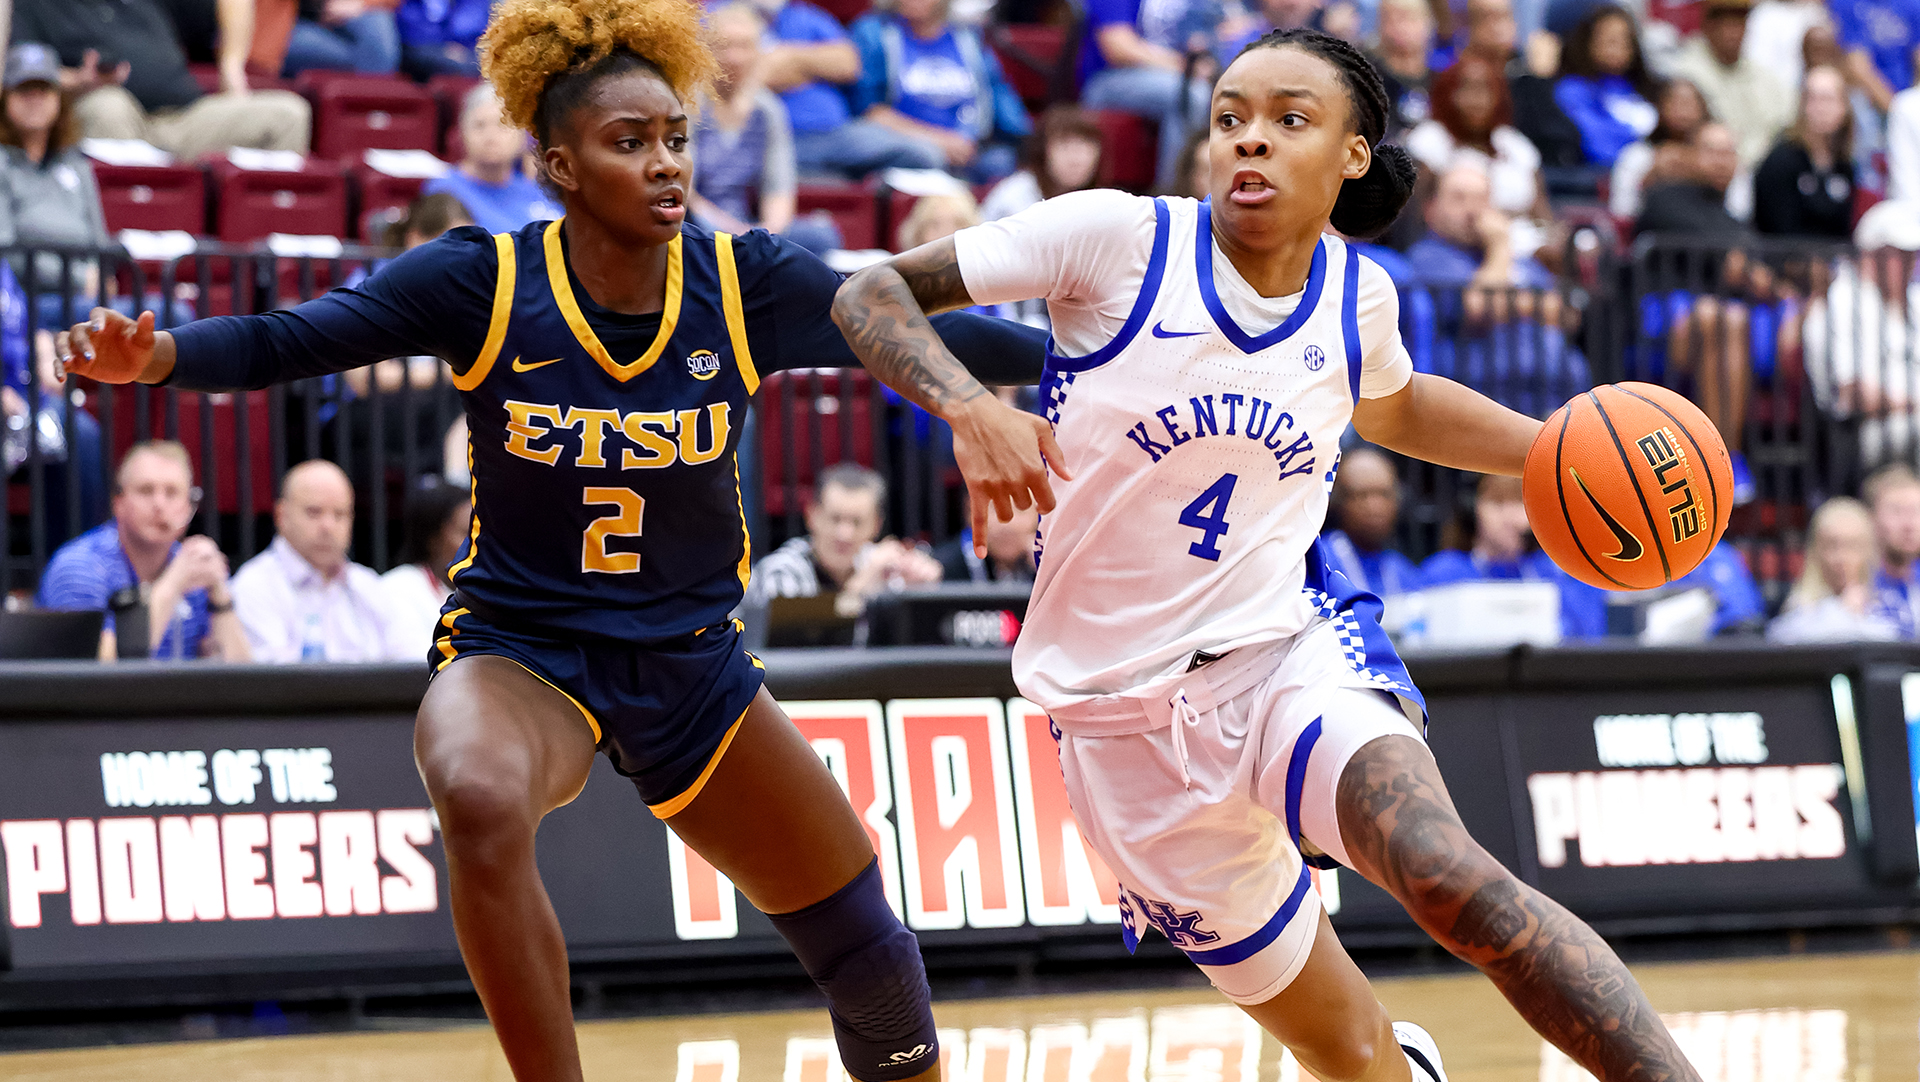 Highlights: Kentucky 74, East Tennessee State 66